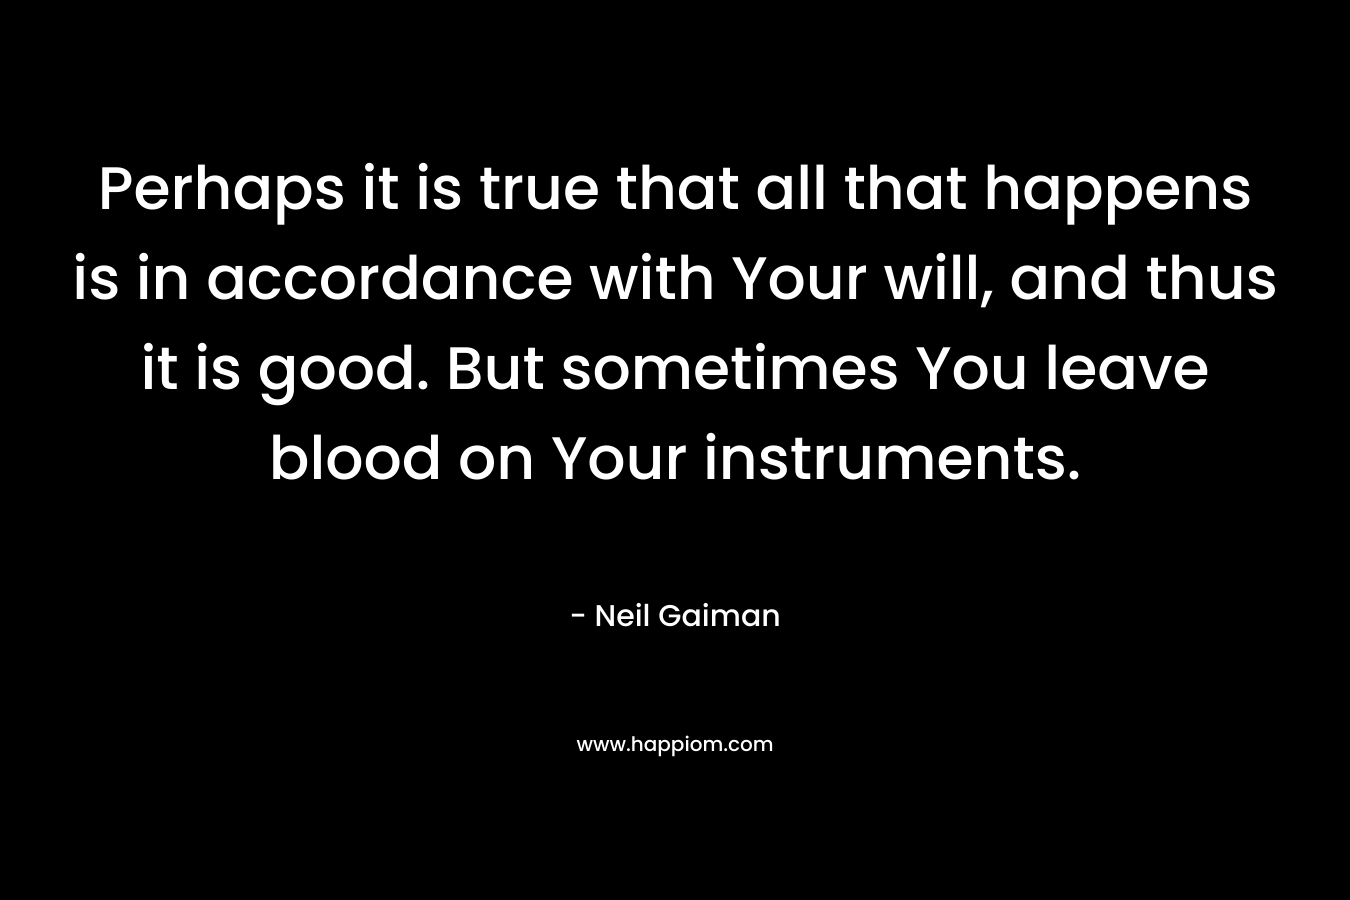 Perhaps it is true that all that happens is in accordance with Your will, and thus it is good. But sometimes You leave blood on Your instruments.